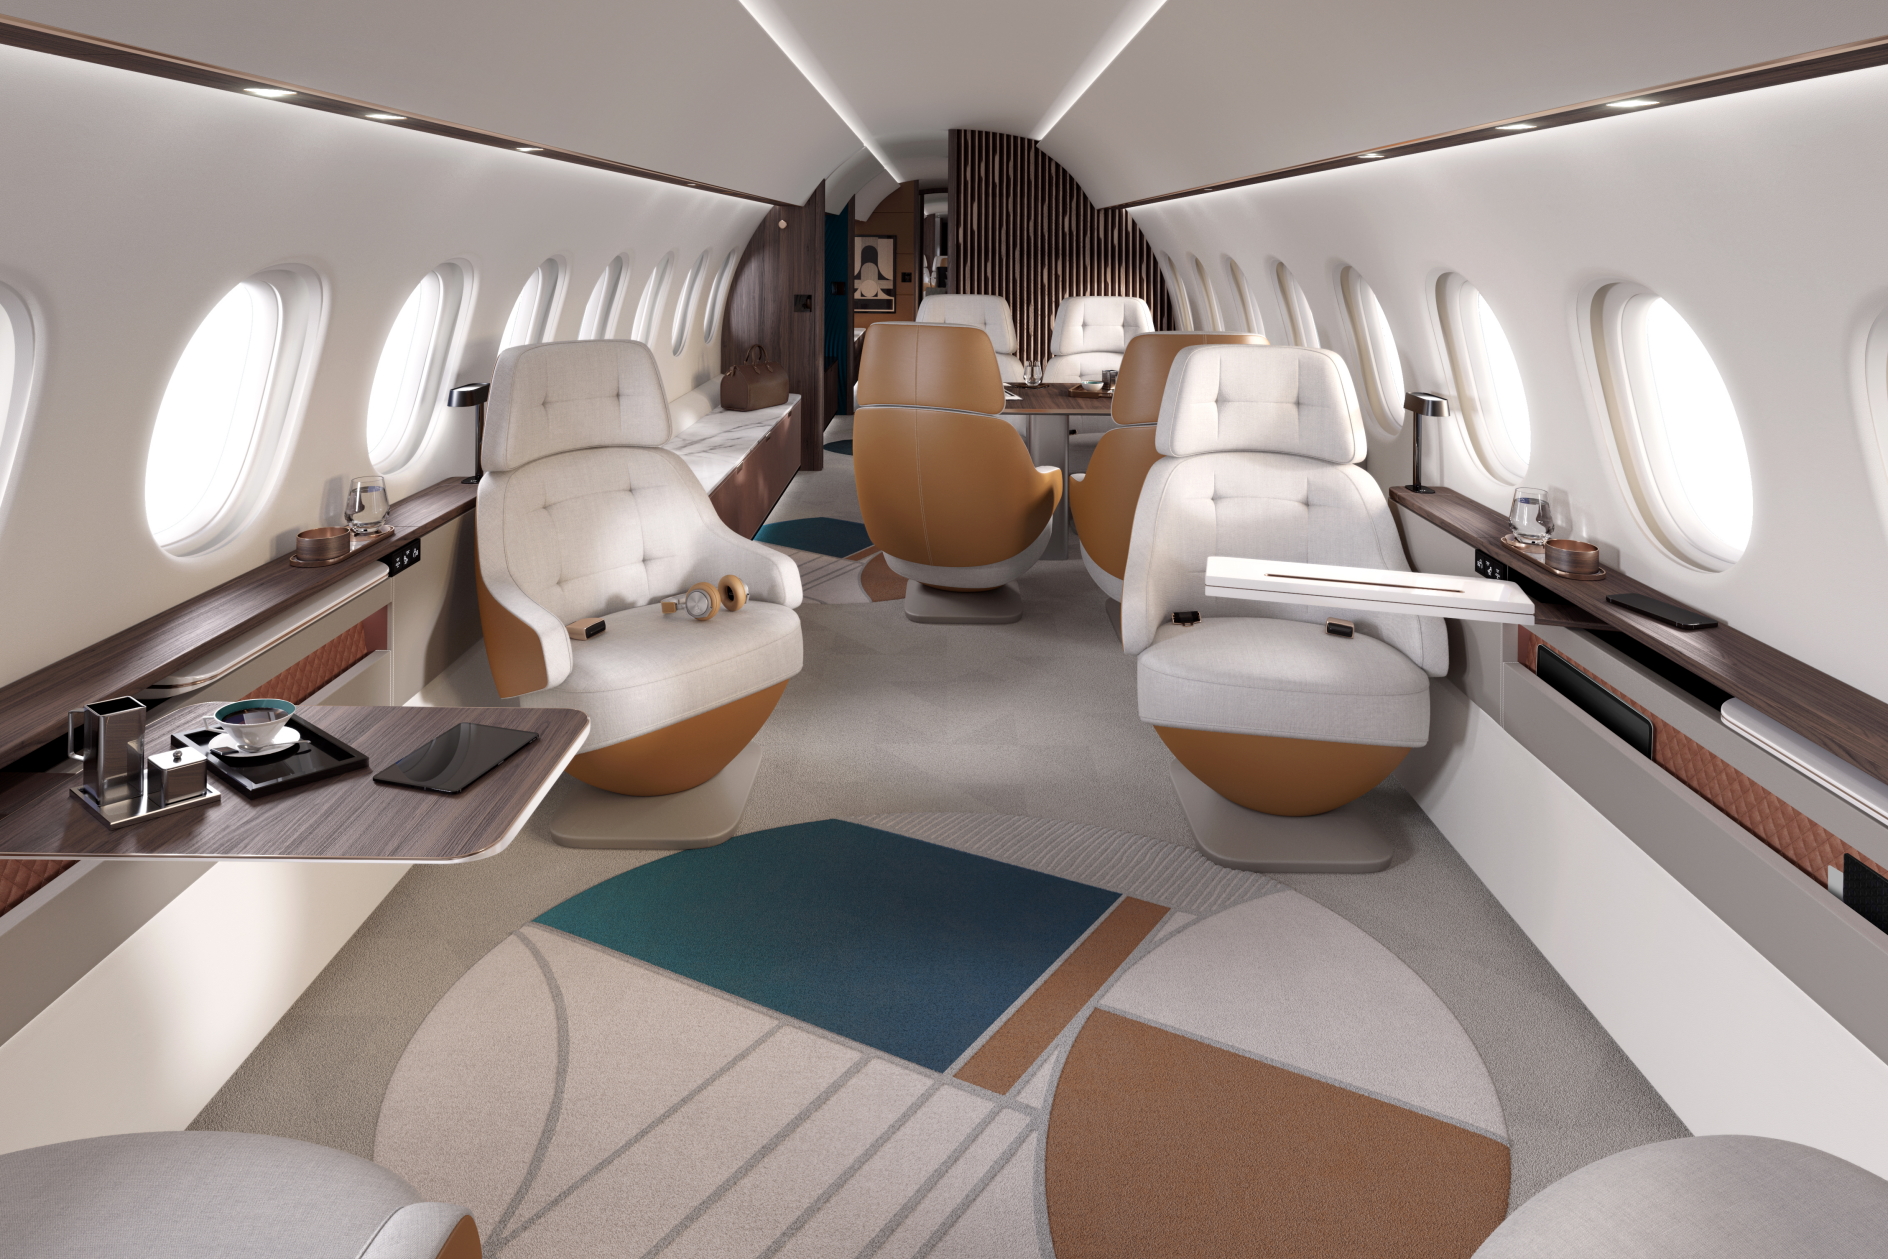 With a range of 7,500 nautical miles and a top speed of Mach 0.925, the Falcon 10X can fly nonstop from New York to Shanghai, Los Angeles to Sydney, Hong Kong to New York or Paris to Santiago. Click to enlarge.